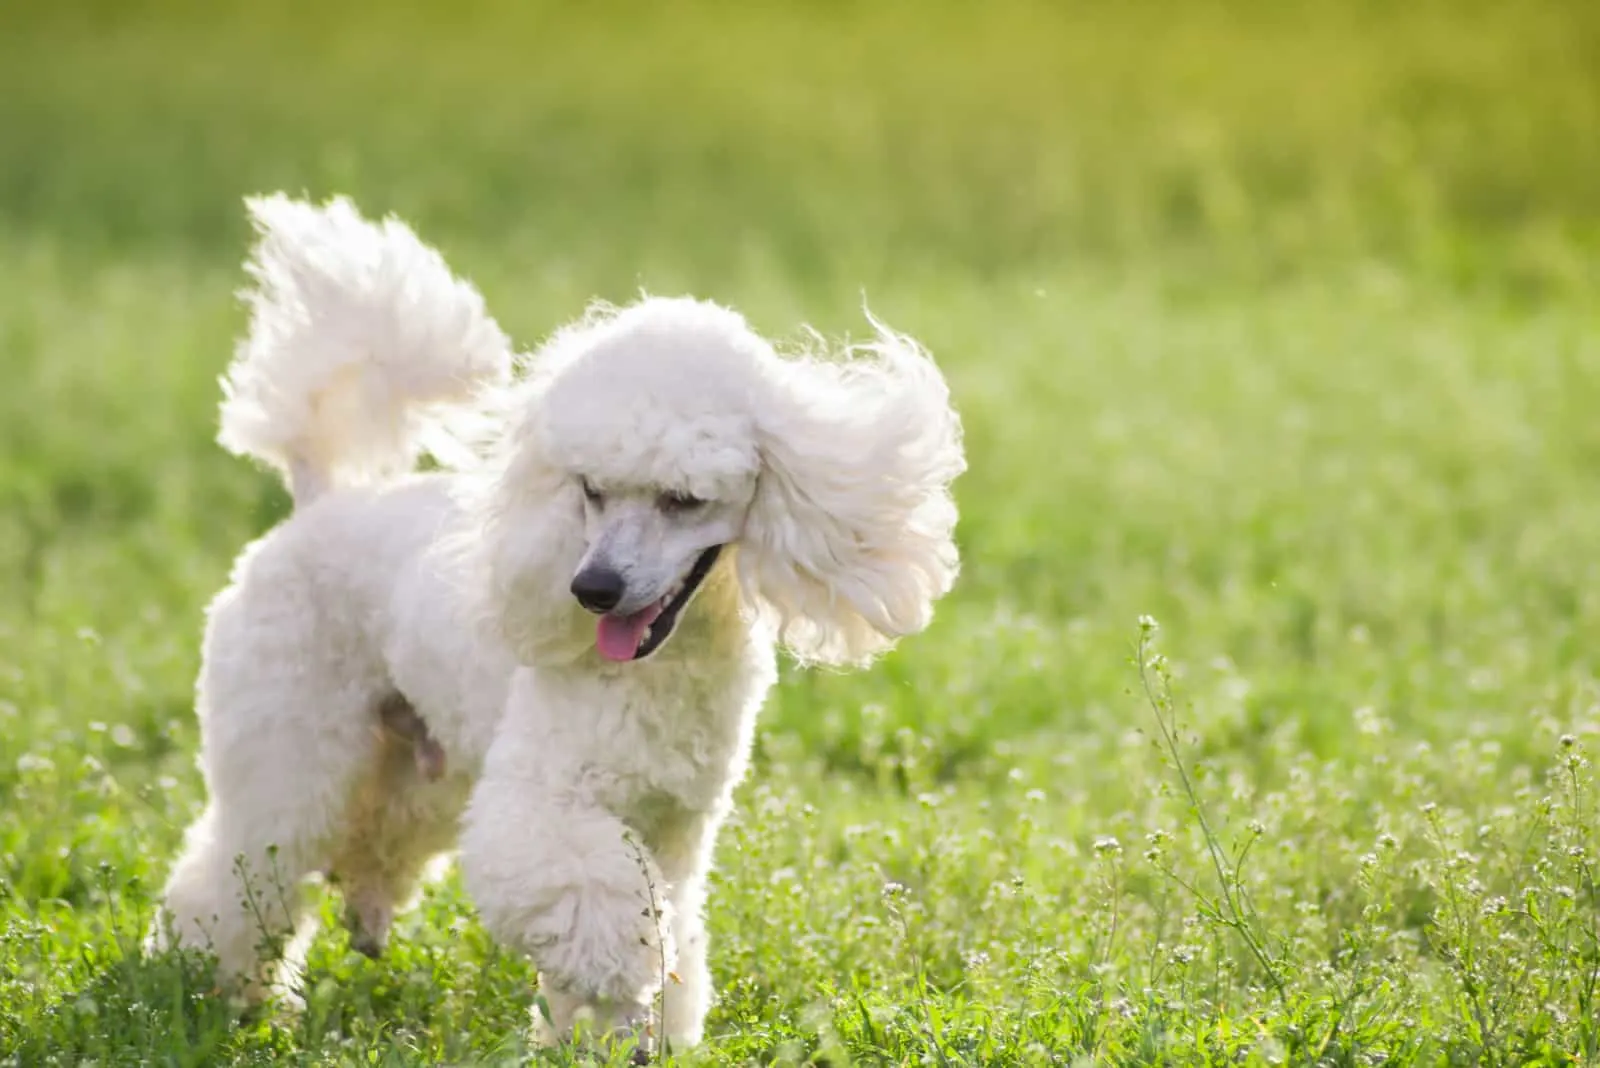 White poodle dog running on green grass